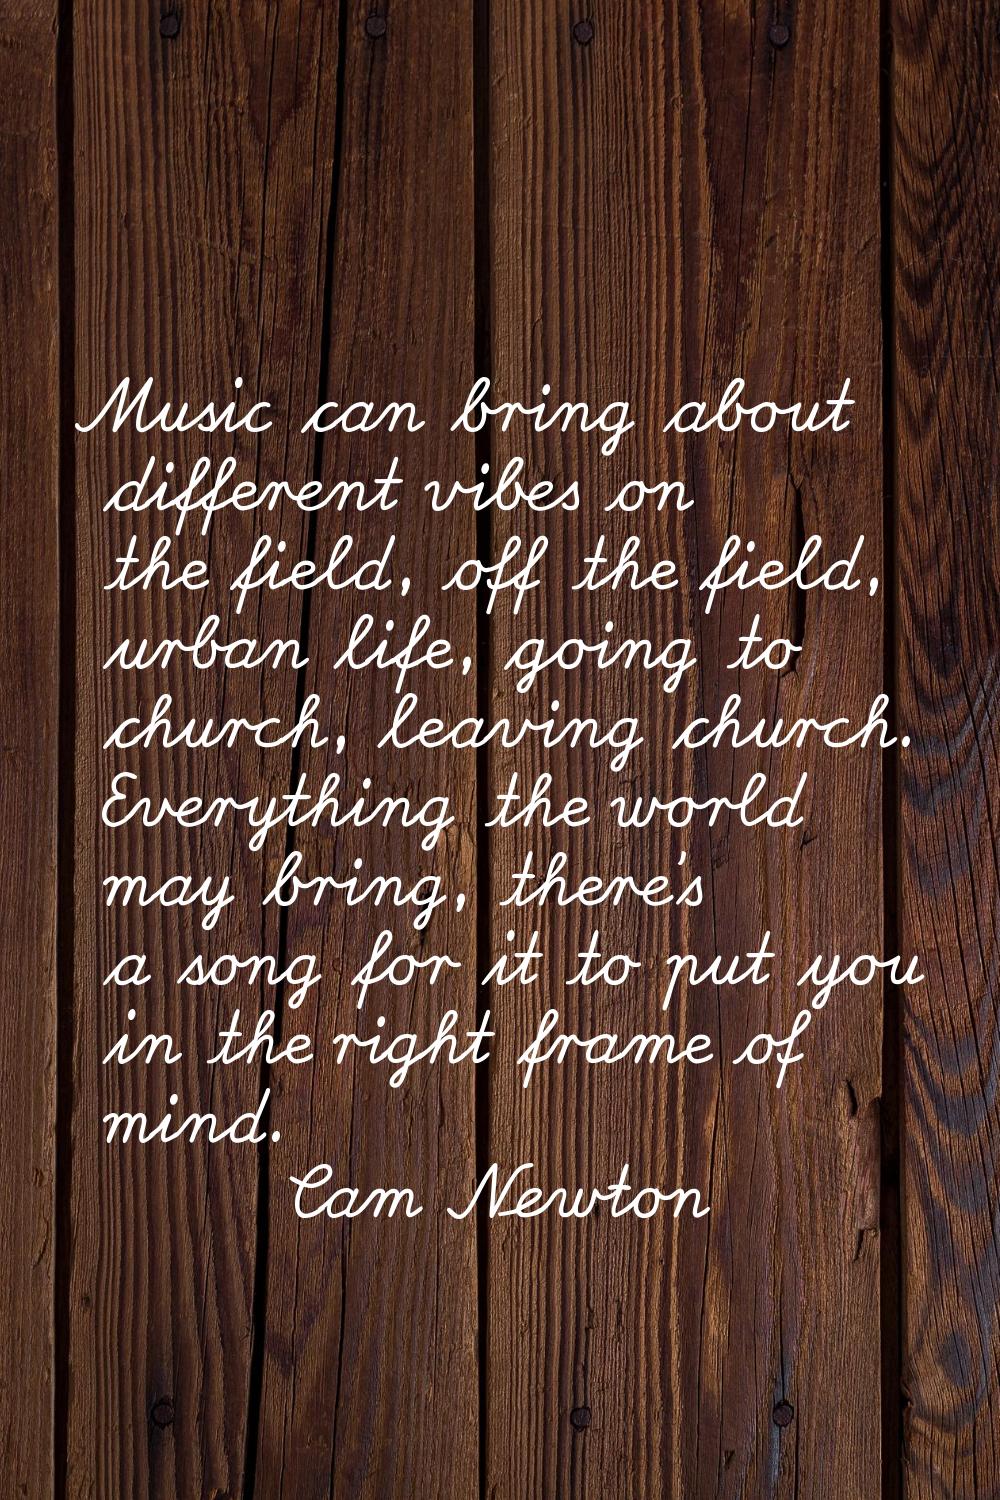 Music can bring about different vibes on the field, off the field, urban life, going to church, lea